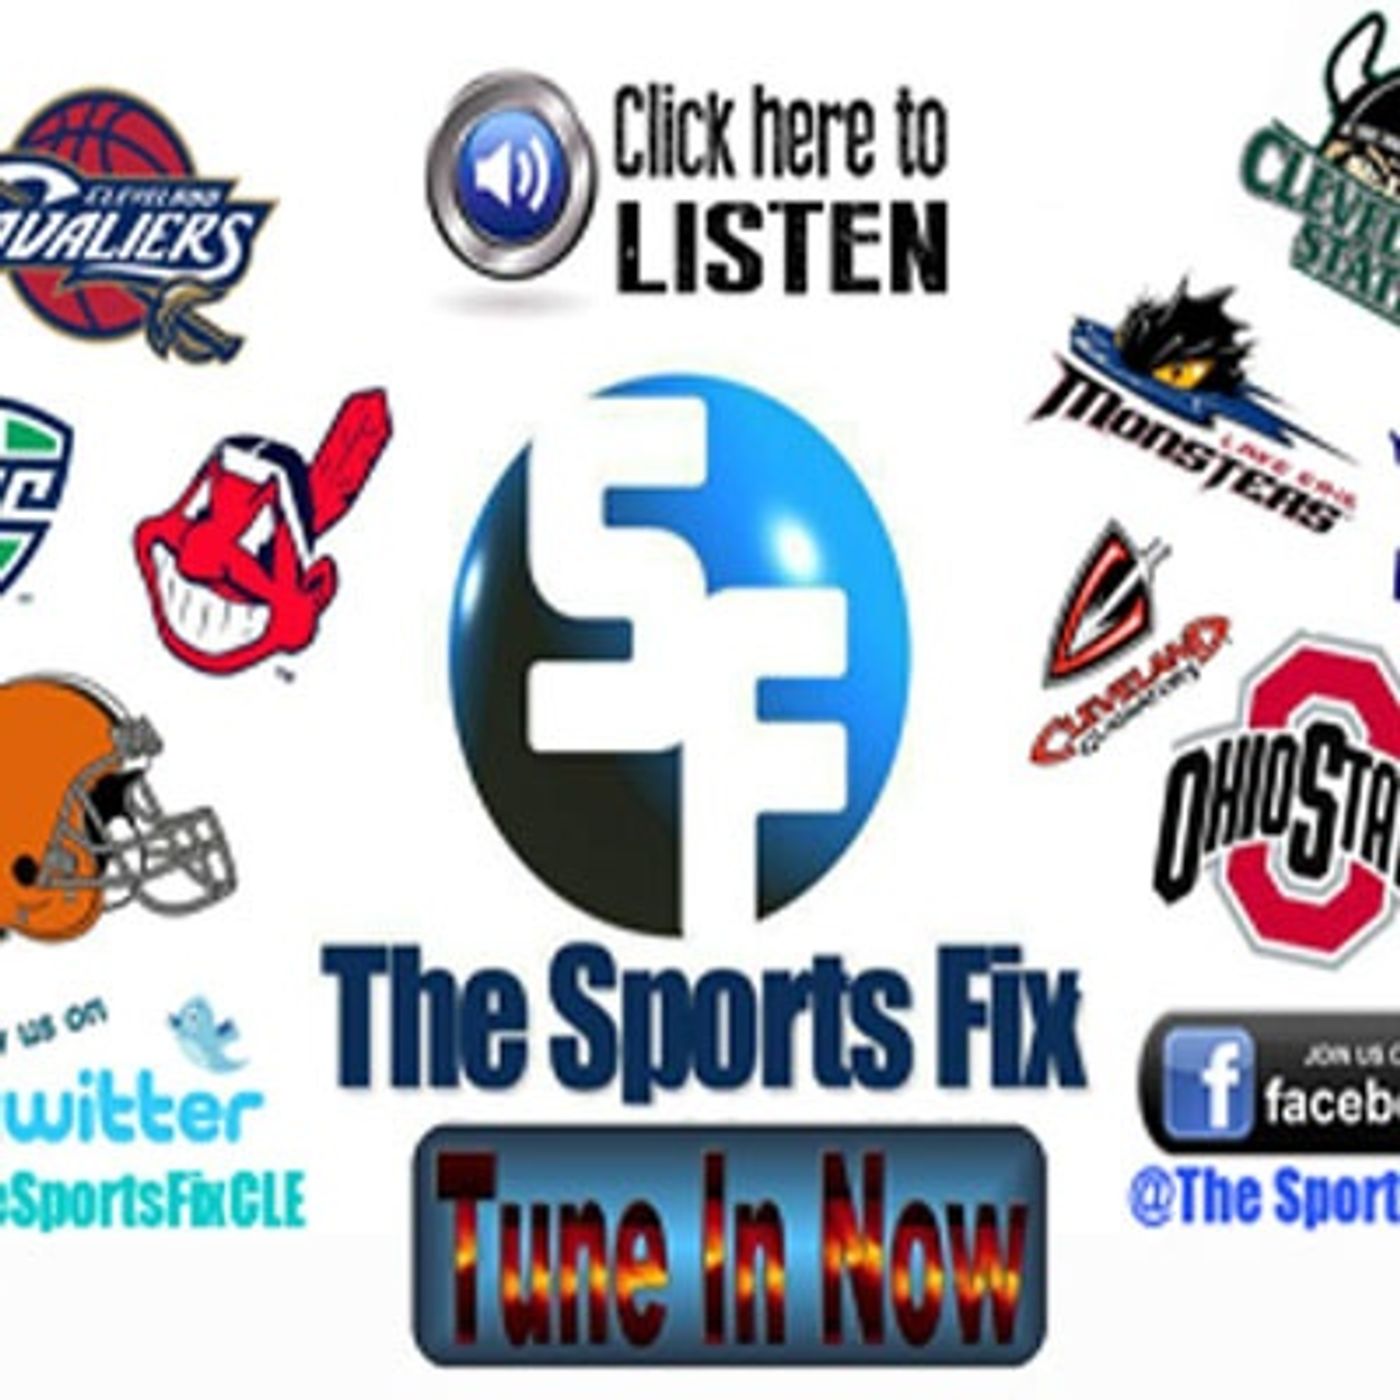 The Sports Fix - Weds Oct 7, 2015